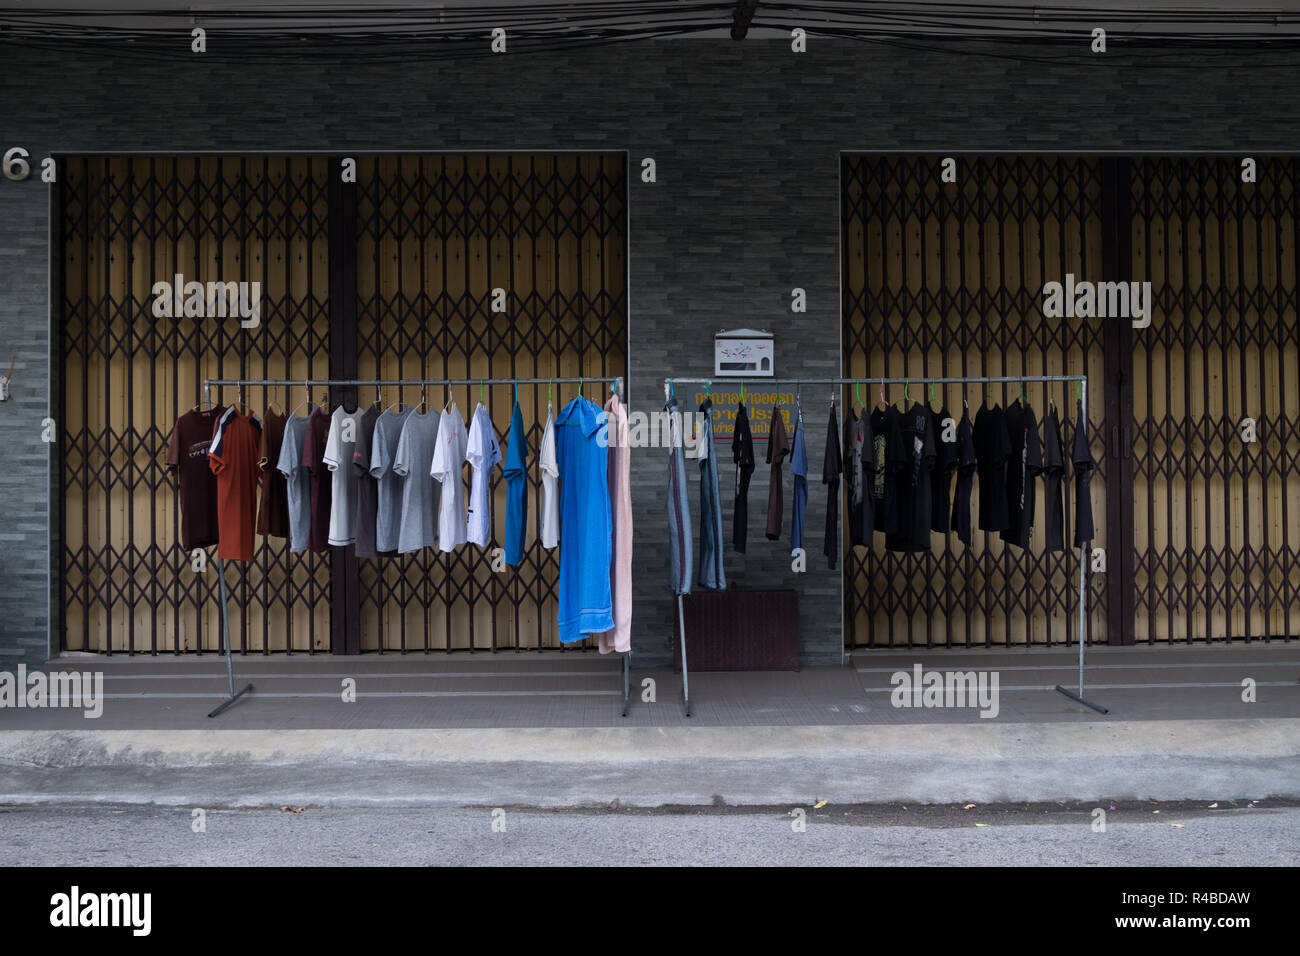 Laundry is carefully set out to dry on racks in Hat Yai, Thailand. Stock Photo